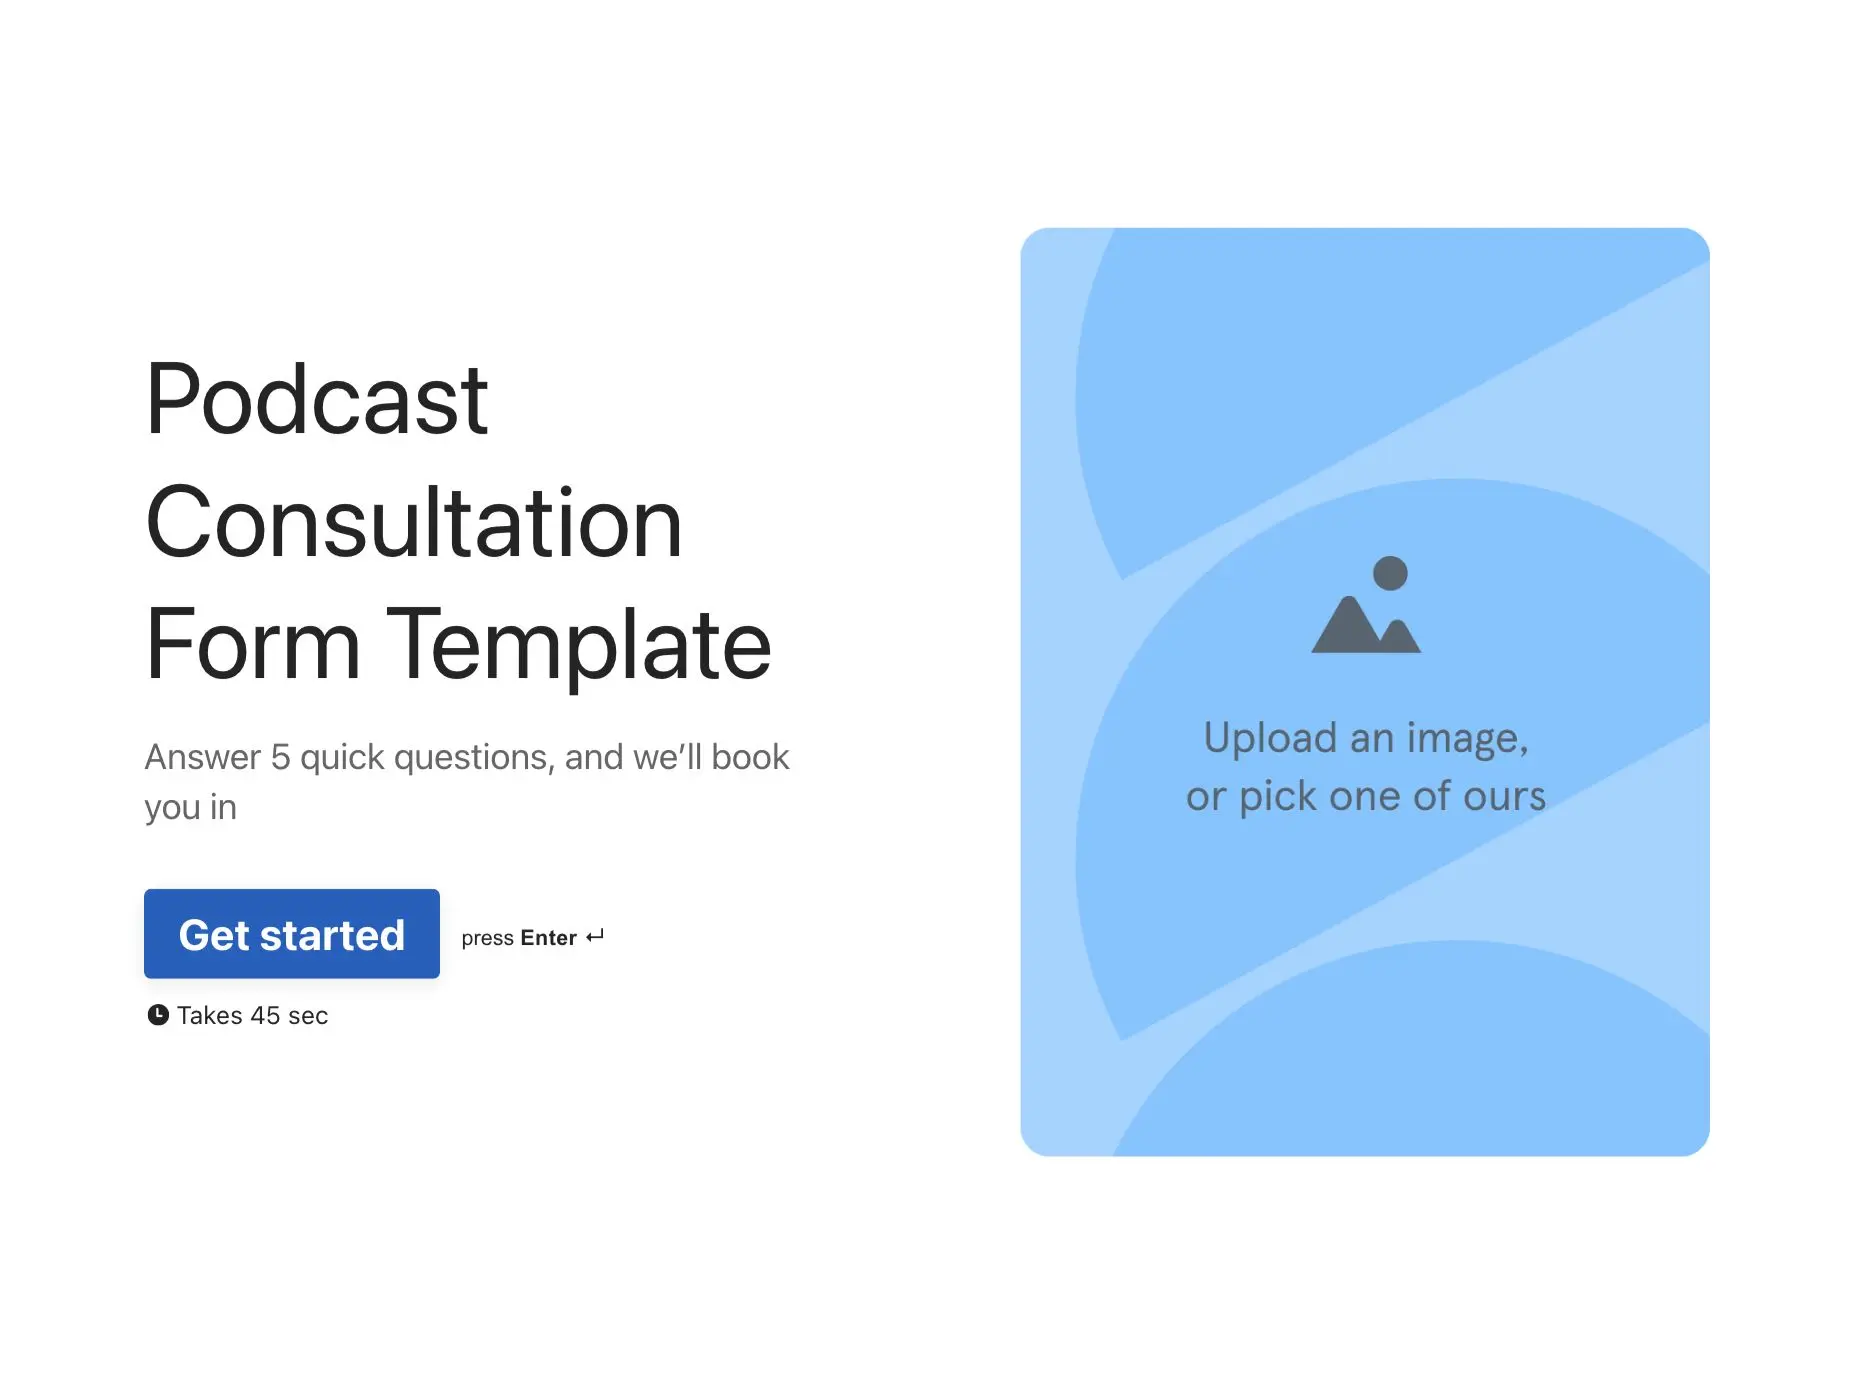 Podcast Consultation Form Template Hero